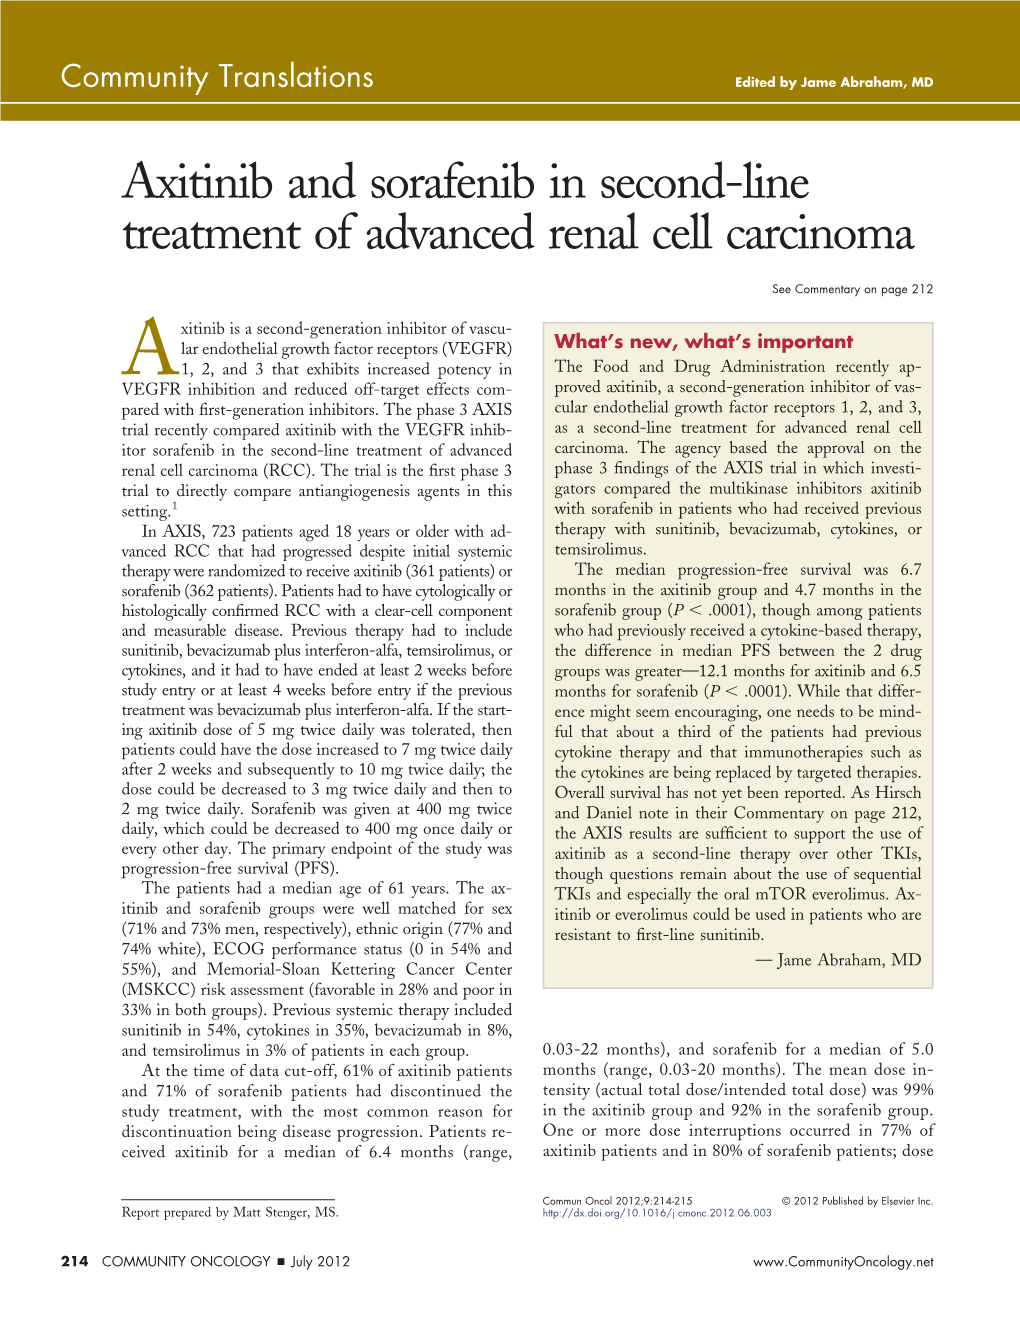 Axitinib and Sorafenib in Second-Line Treatment of Advanced Renal Cell Carcinoma